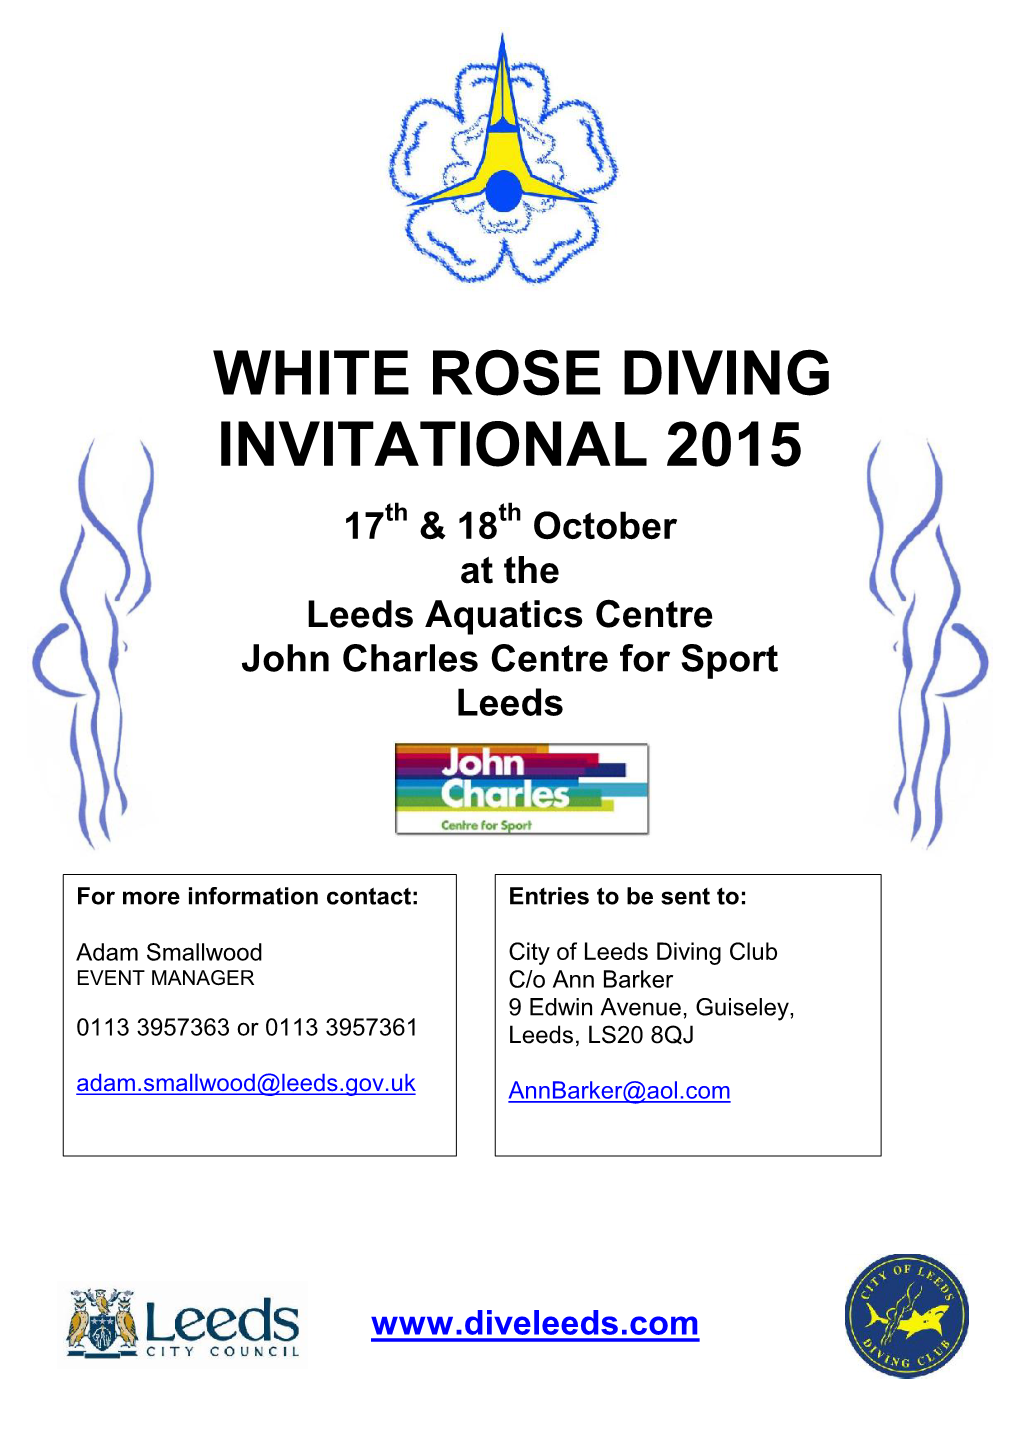 The White Rose Diving Invitational 2000